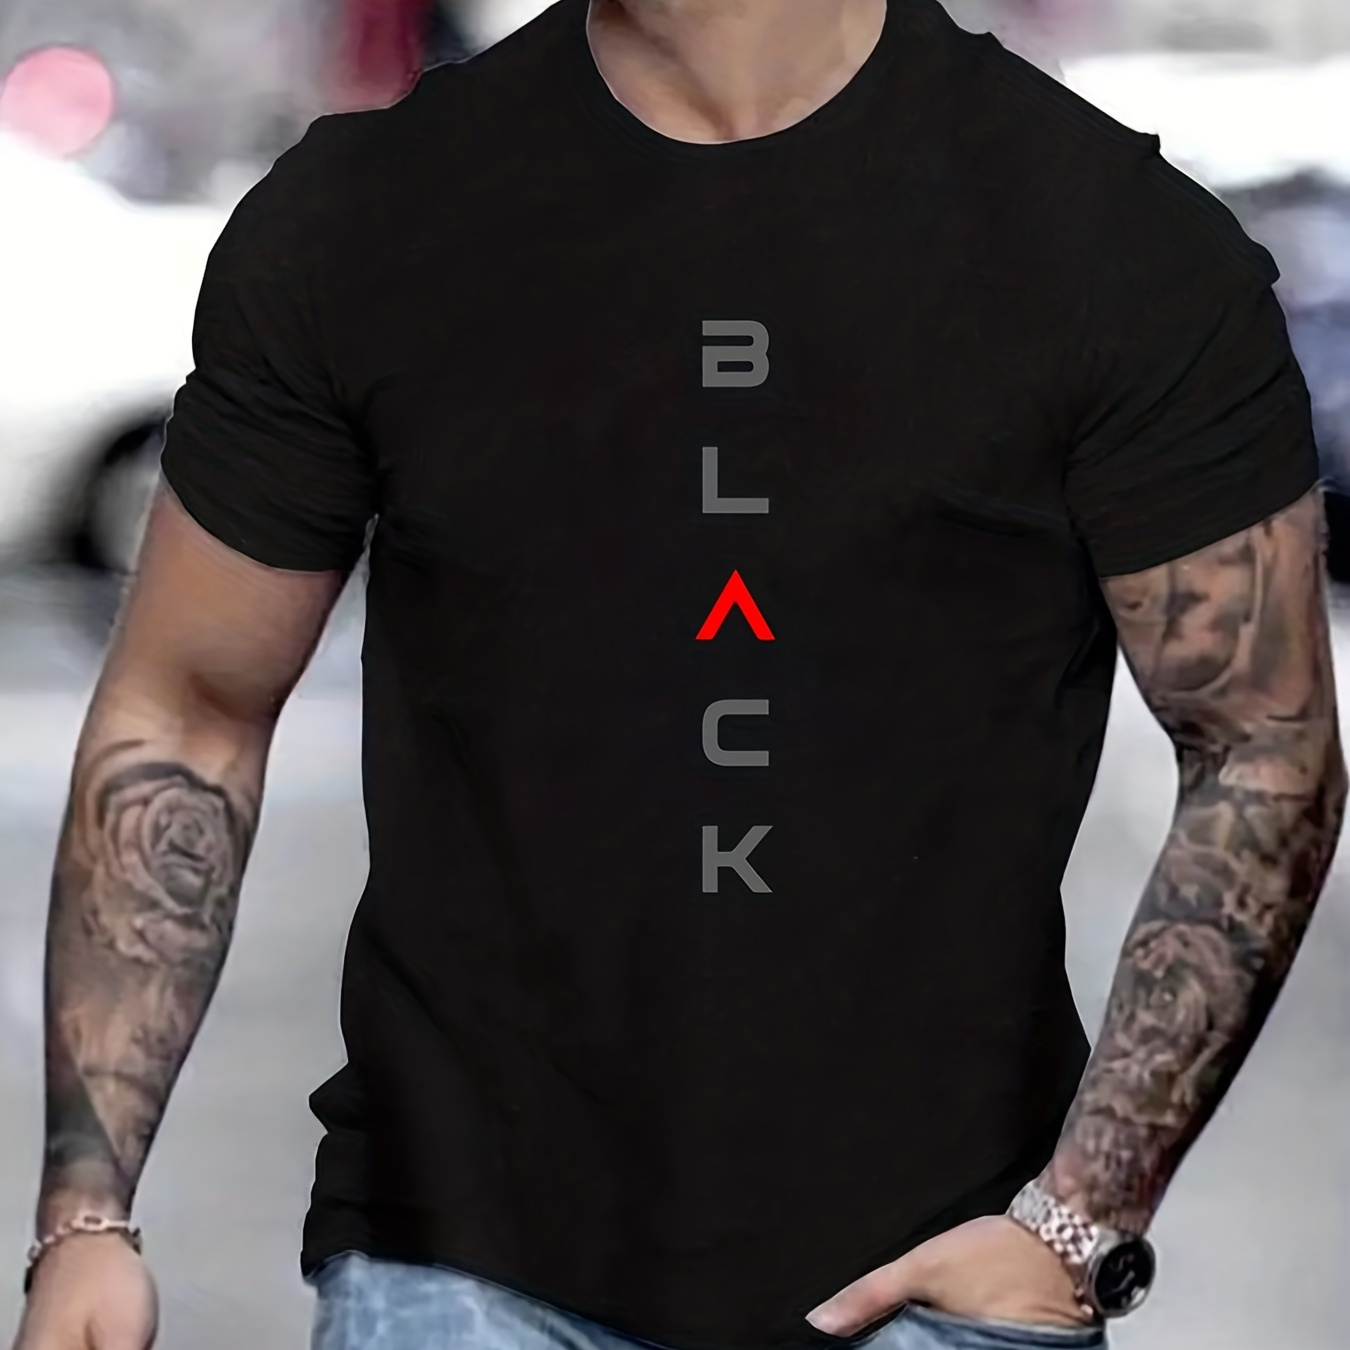 

'black' Print Tee Shirt, Tee For Men, Casual Short Sleeve T-shirt For Summer Spring Fall, Tops As Gifts